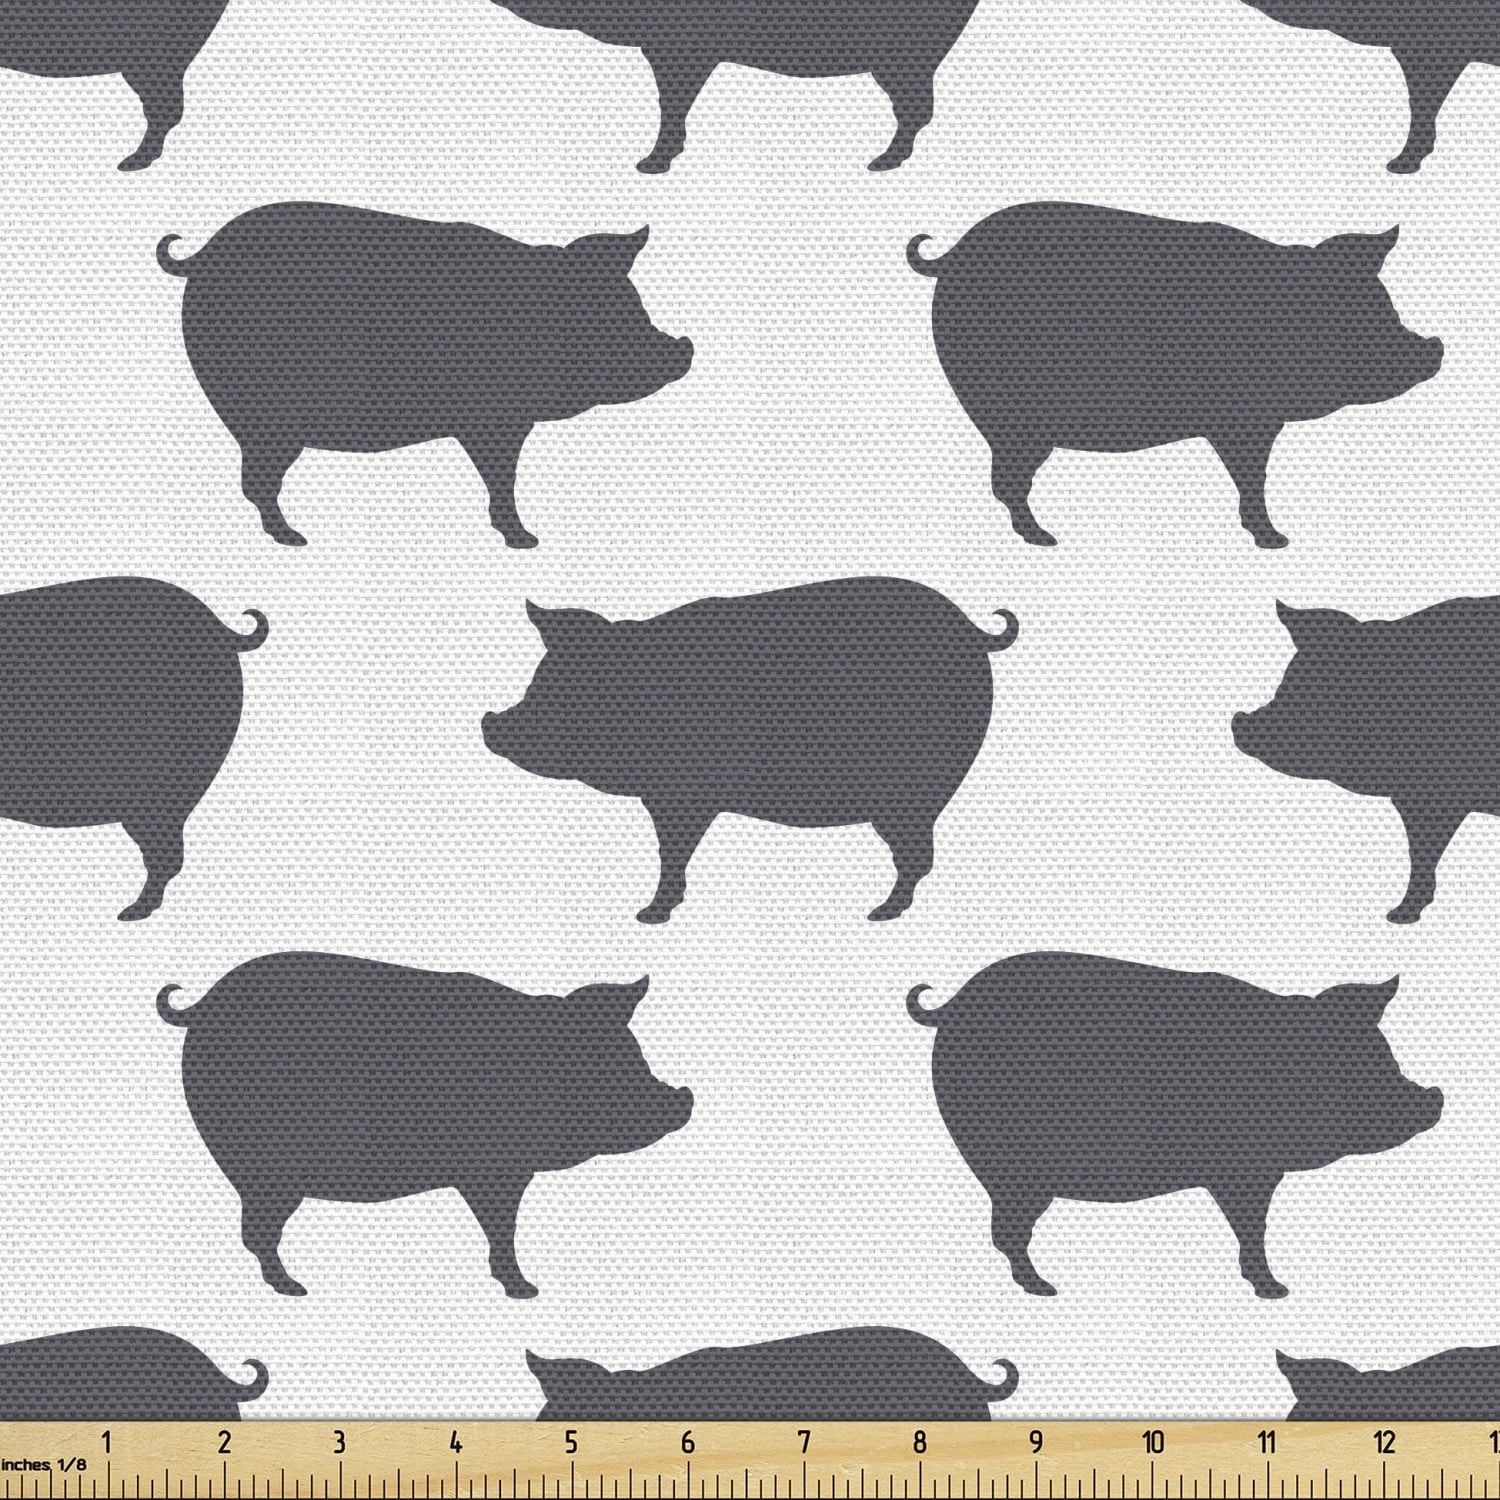 Pig Sofa Upholstery Fabric by the Yard, Continuous Pig Animal Silhouette Pattern Domestic Mammal Husbandry Concept, Decorative Fabric for DIY & Home Accents, 2 Yards, Charcoal Grey White by Ambesonne